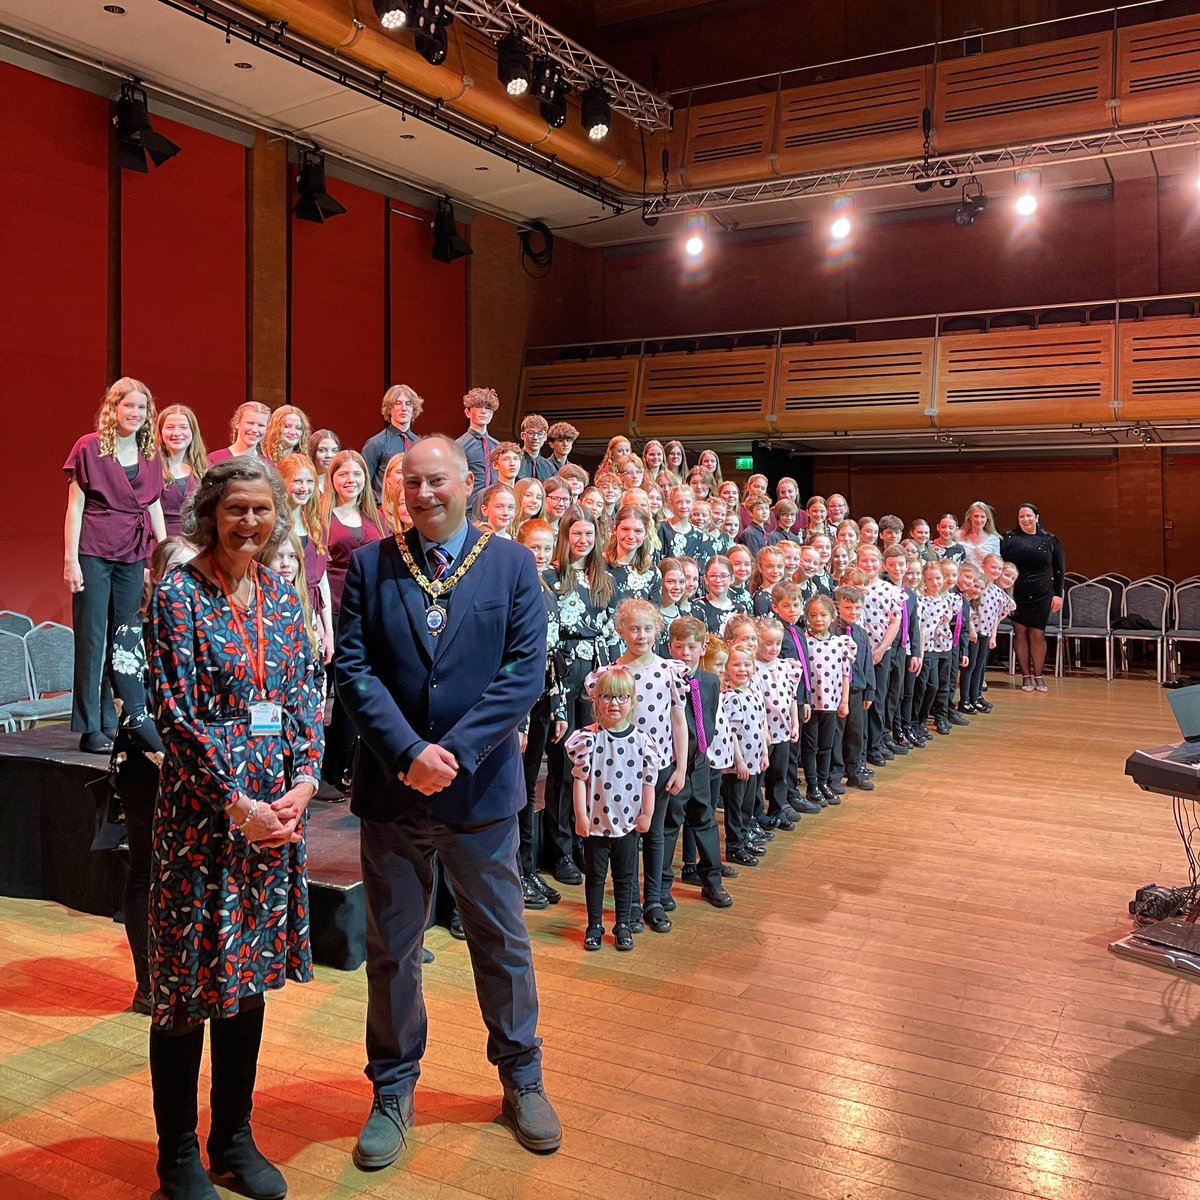 A fantastic turn out tonight for the Spring is Sung concert, performed by The Voice Squad and hosted by West Suffolk Council Chair, Cllr Roger Dicker. The event raised funds for the Chair’s chosen charity, Our Special Friends. @OSF_Charity @VoiceSquadChoir @TheApexVenue